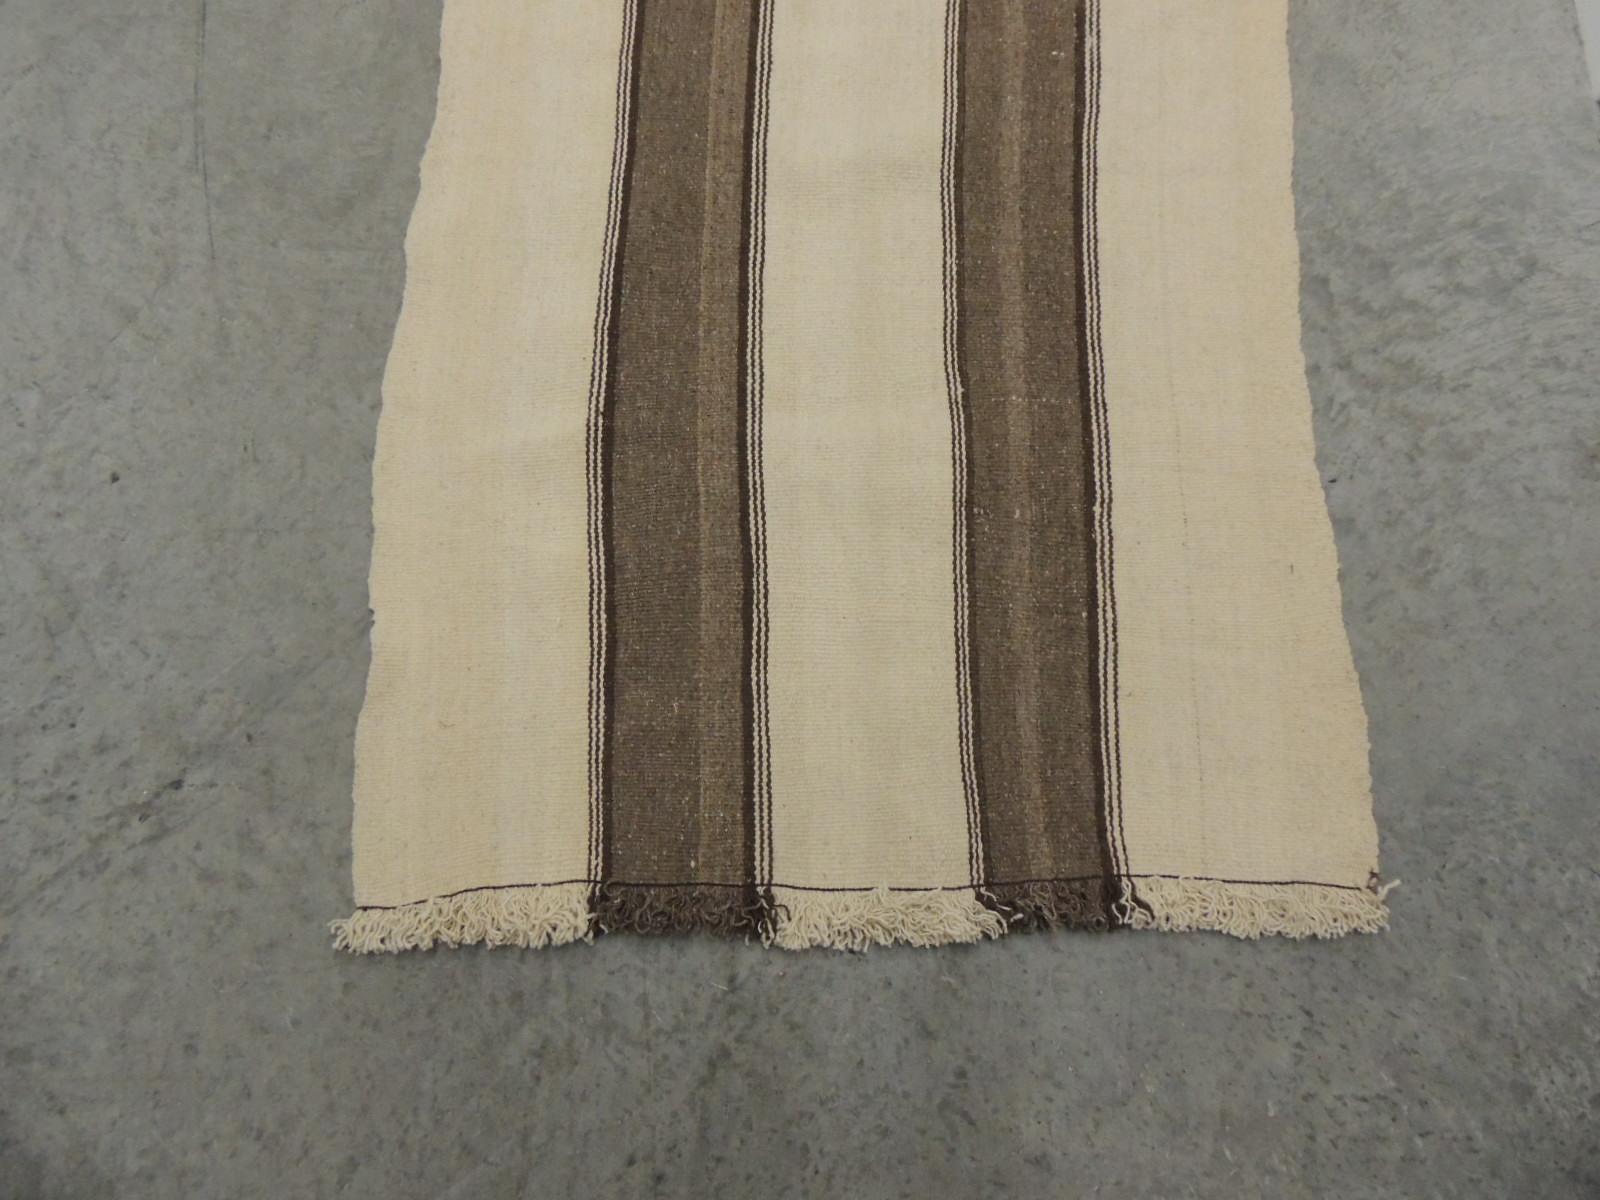 Long brown and natural Berber hallway or stairs runner.
Striped Kilim flat-weave rug/runner with small end fringes.
Comes with runner pad.
Size: 30.5